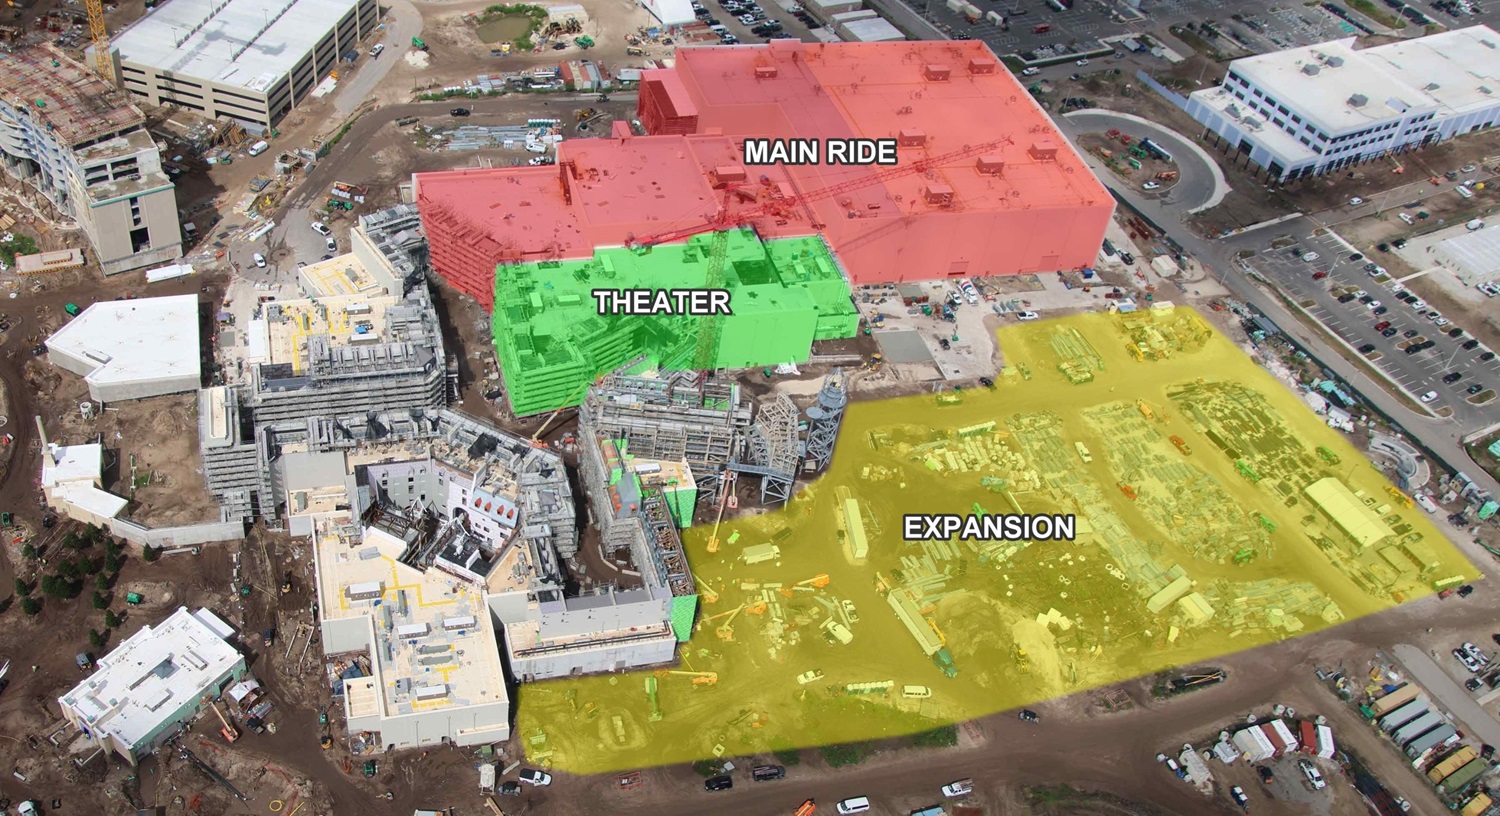 Main ride, theater, and expansion areas within Epic Universe’s Wizarding World (Source: Orlando Park Stop)